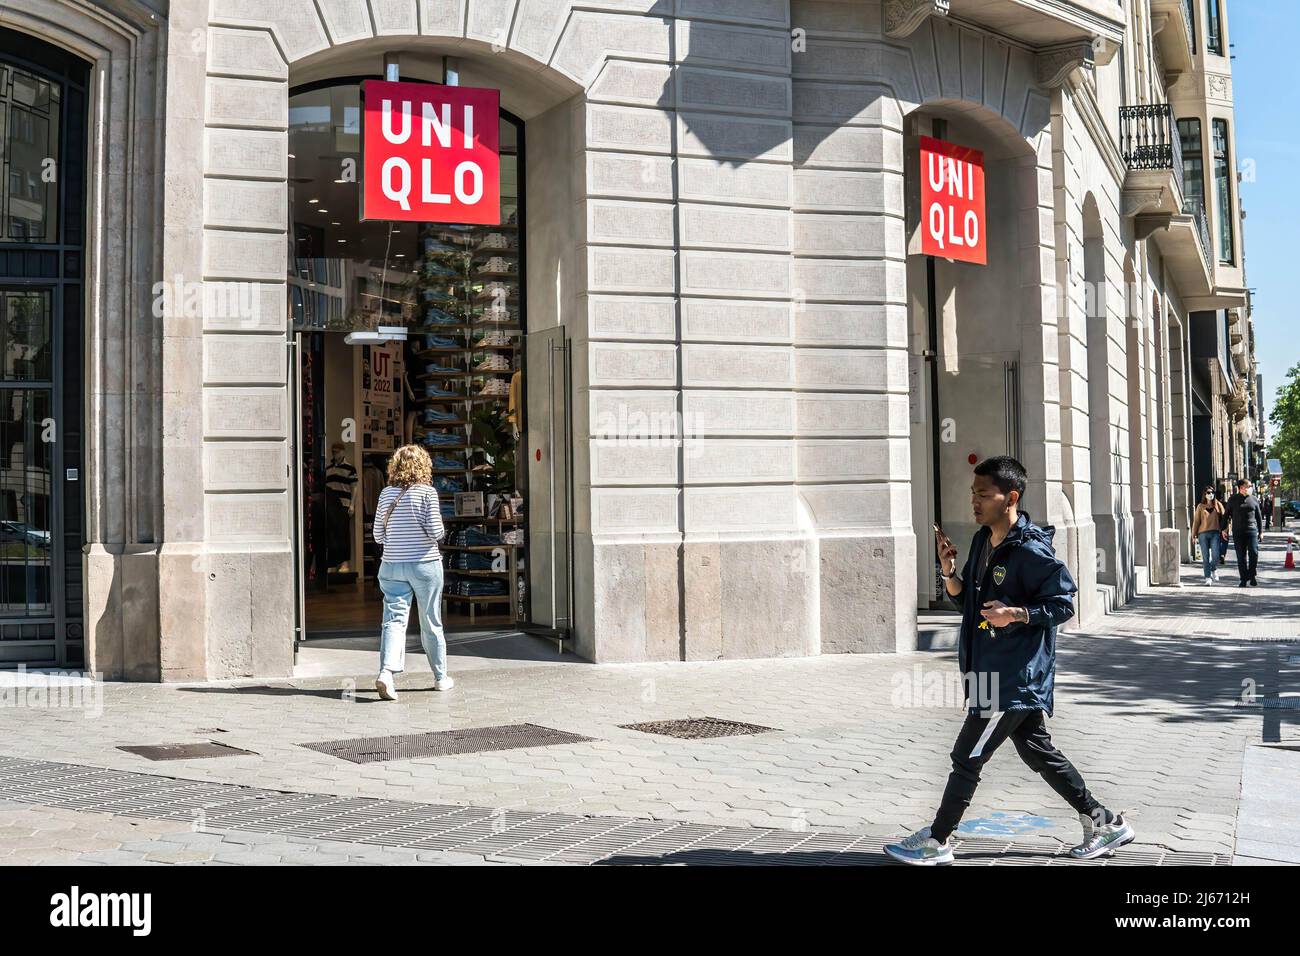 Japanese clothing brand Uniqlo logo and store in Barcelona, Spain Stock  Photo - Alamy